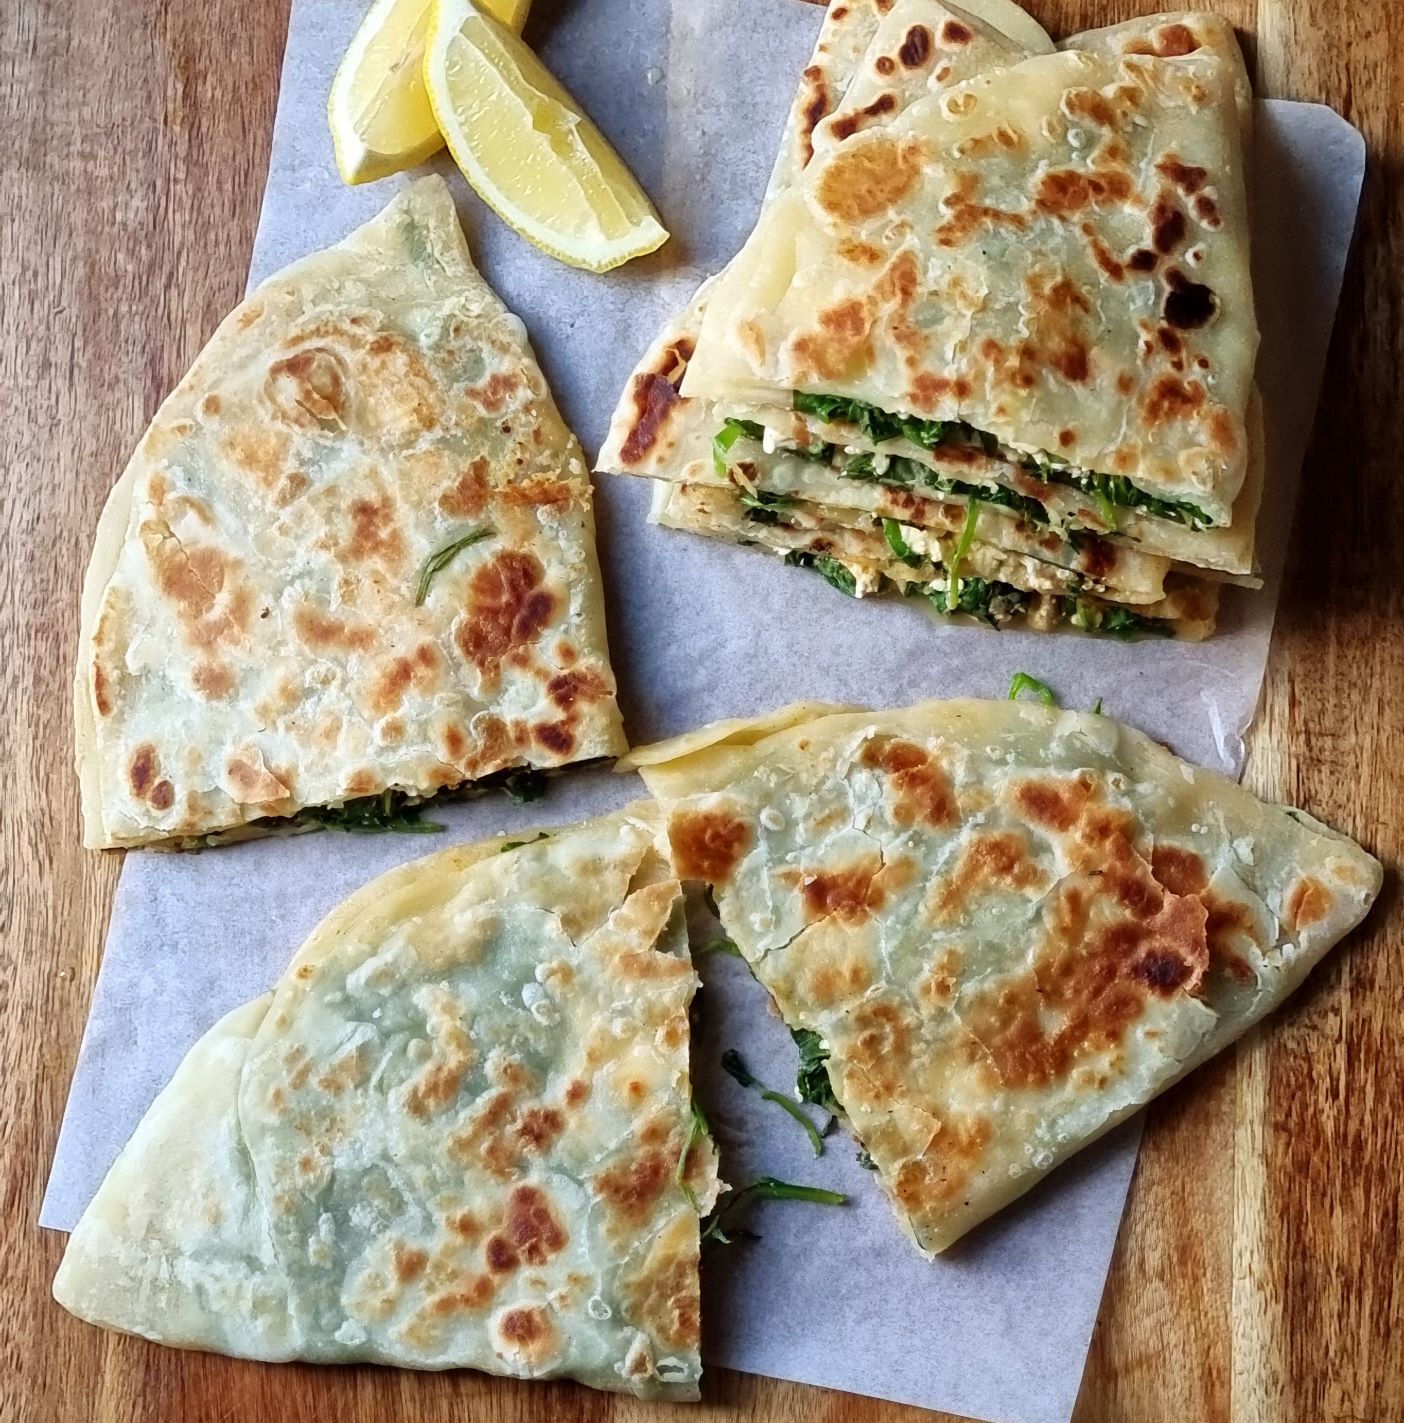 Crispy, golden Turkish flatbreads stuffed with Spinach and Feta cheese.